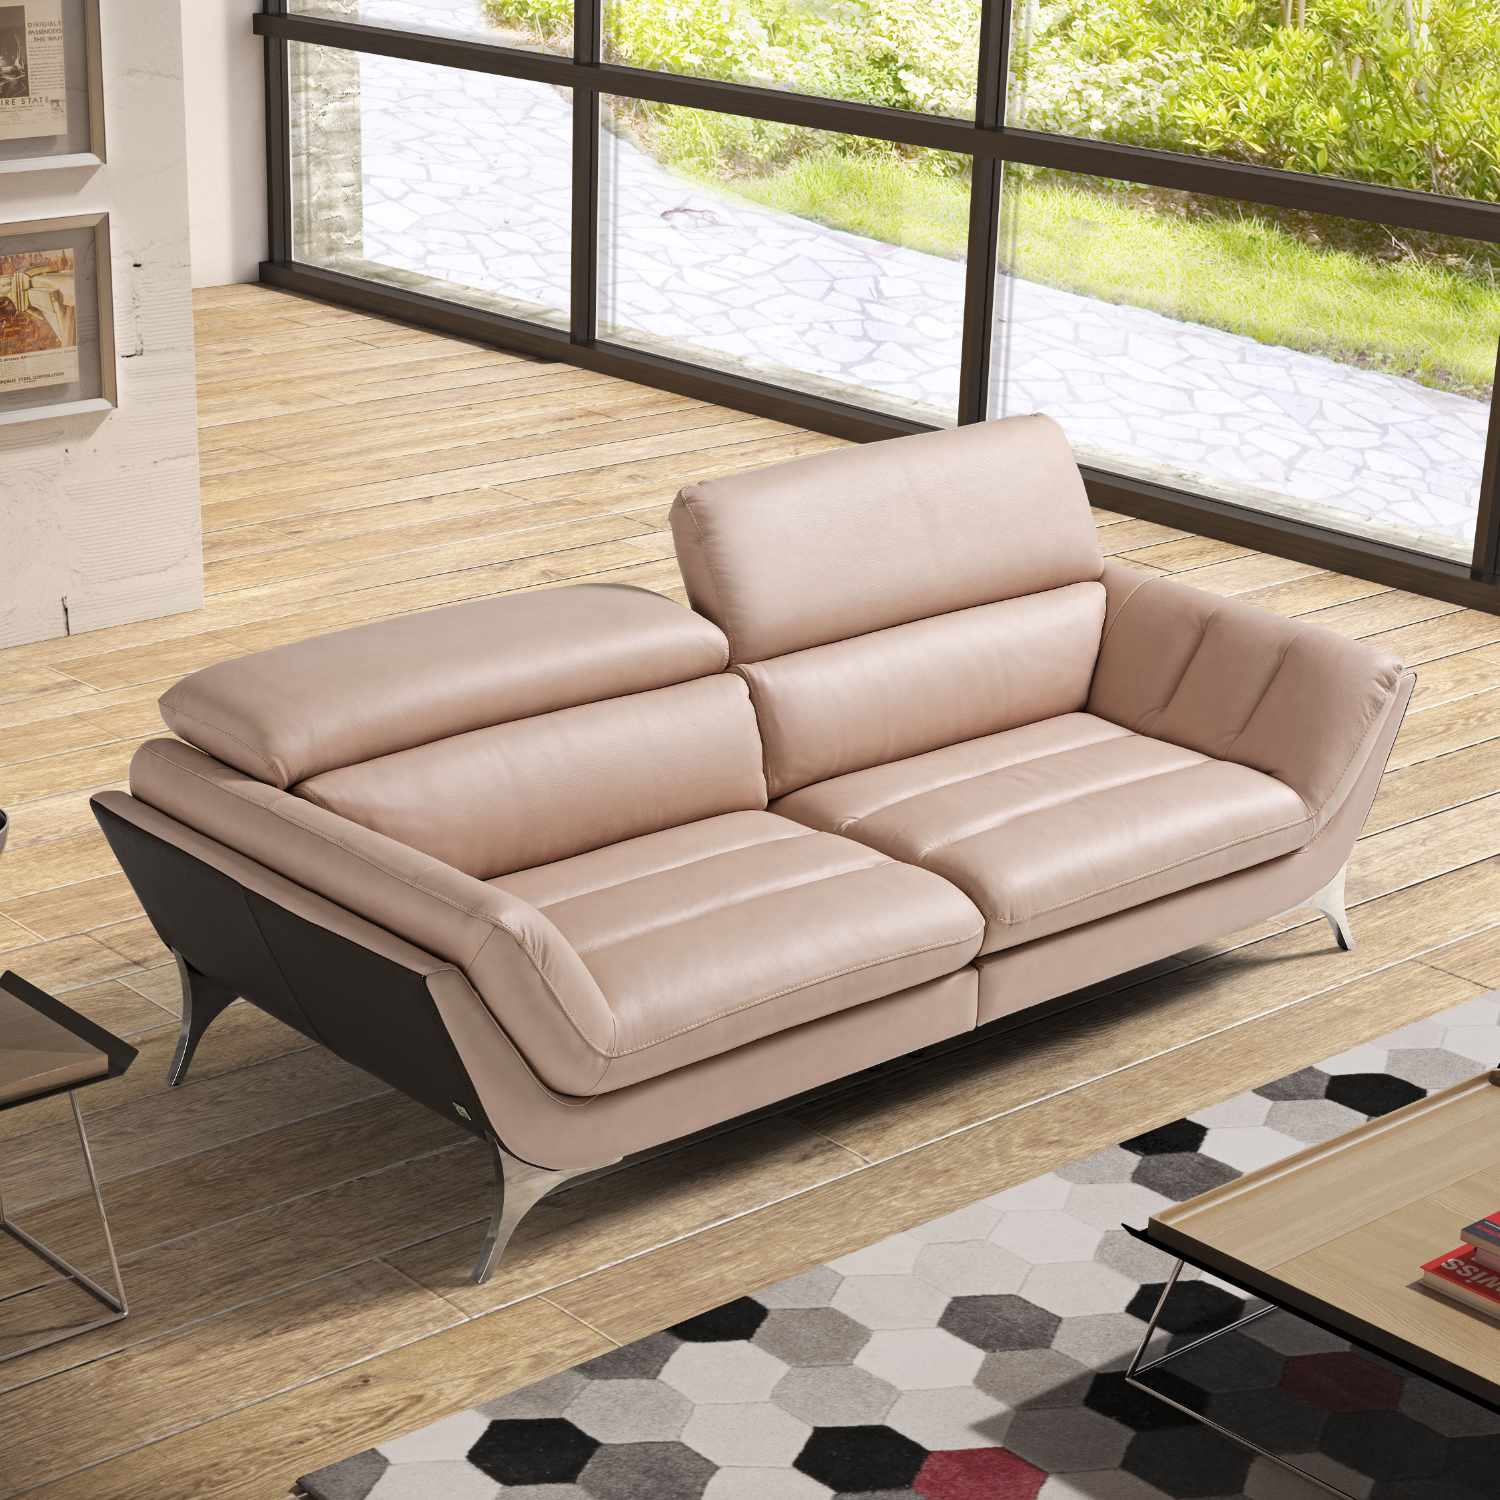 The Sueli two seater sofa in leather